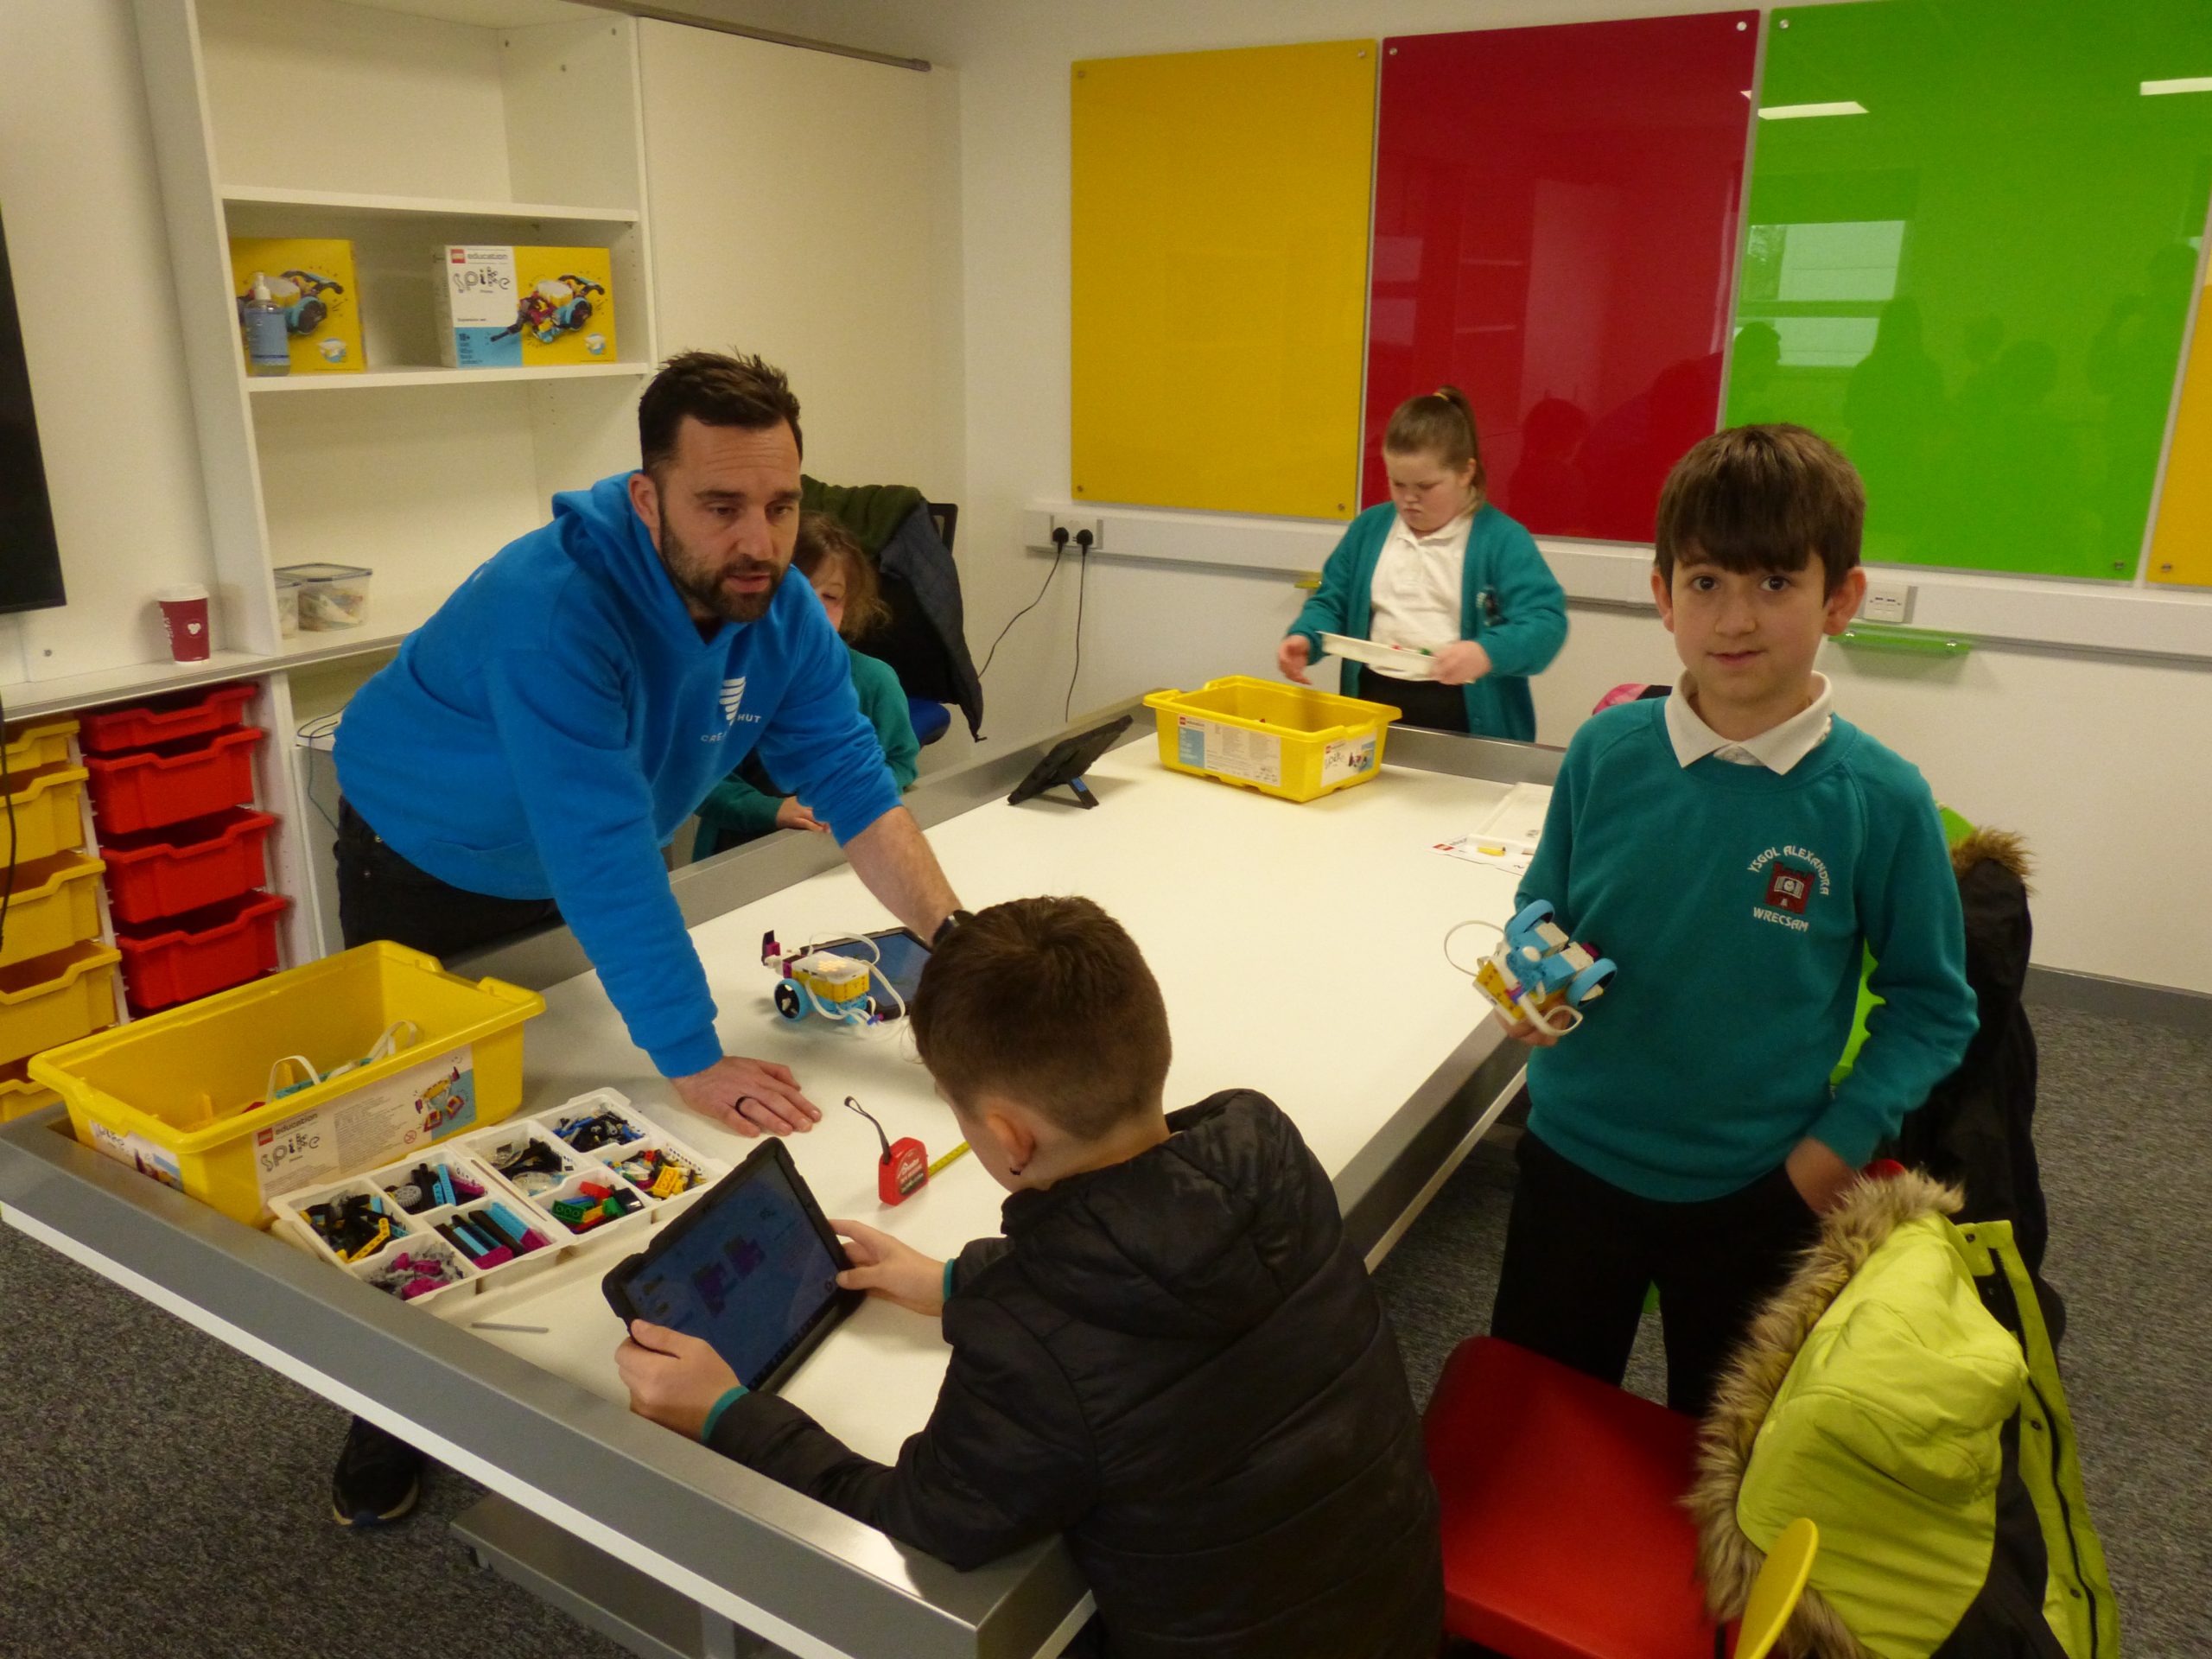 Children from Aalexandra Primary School using the facilities in the STM rooms at Ysgol Clywedog